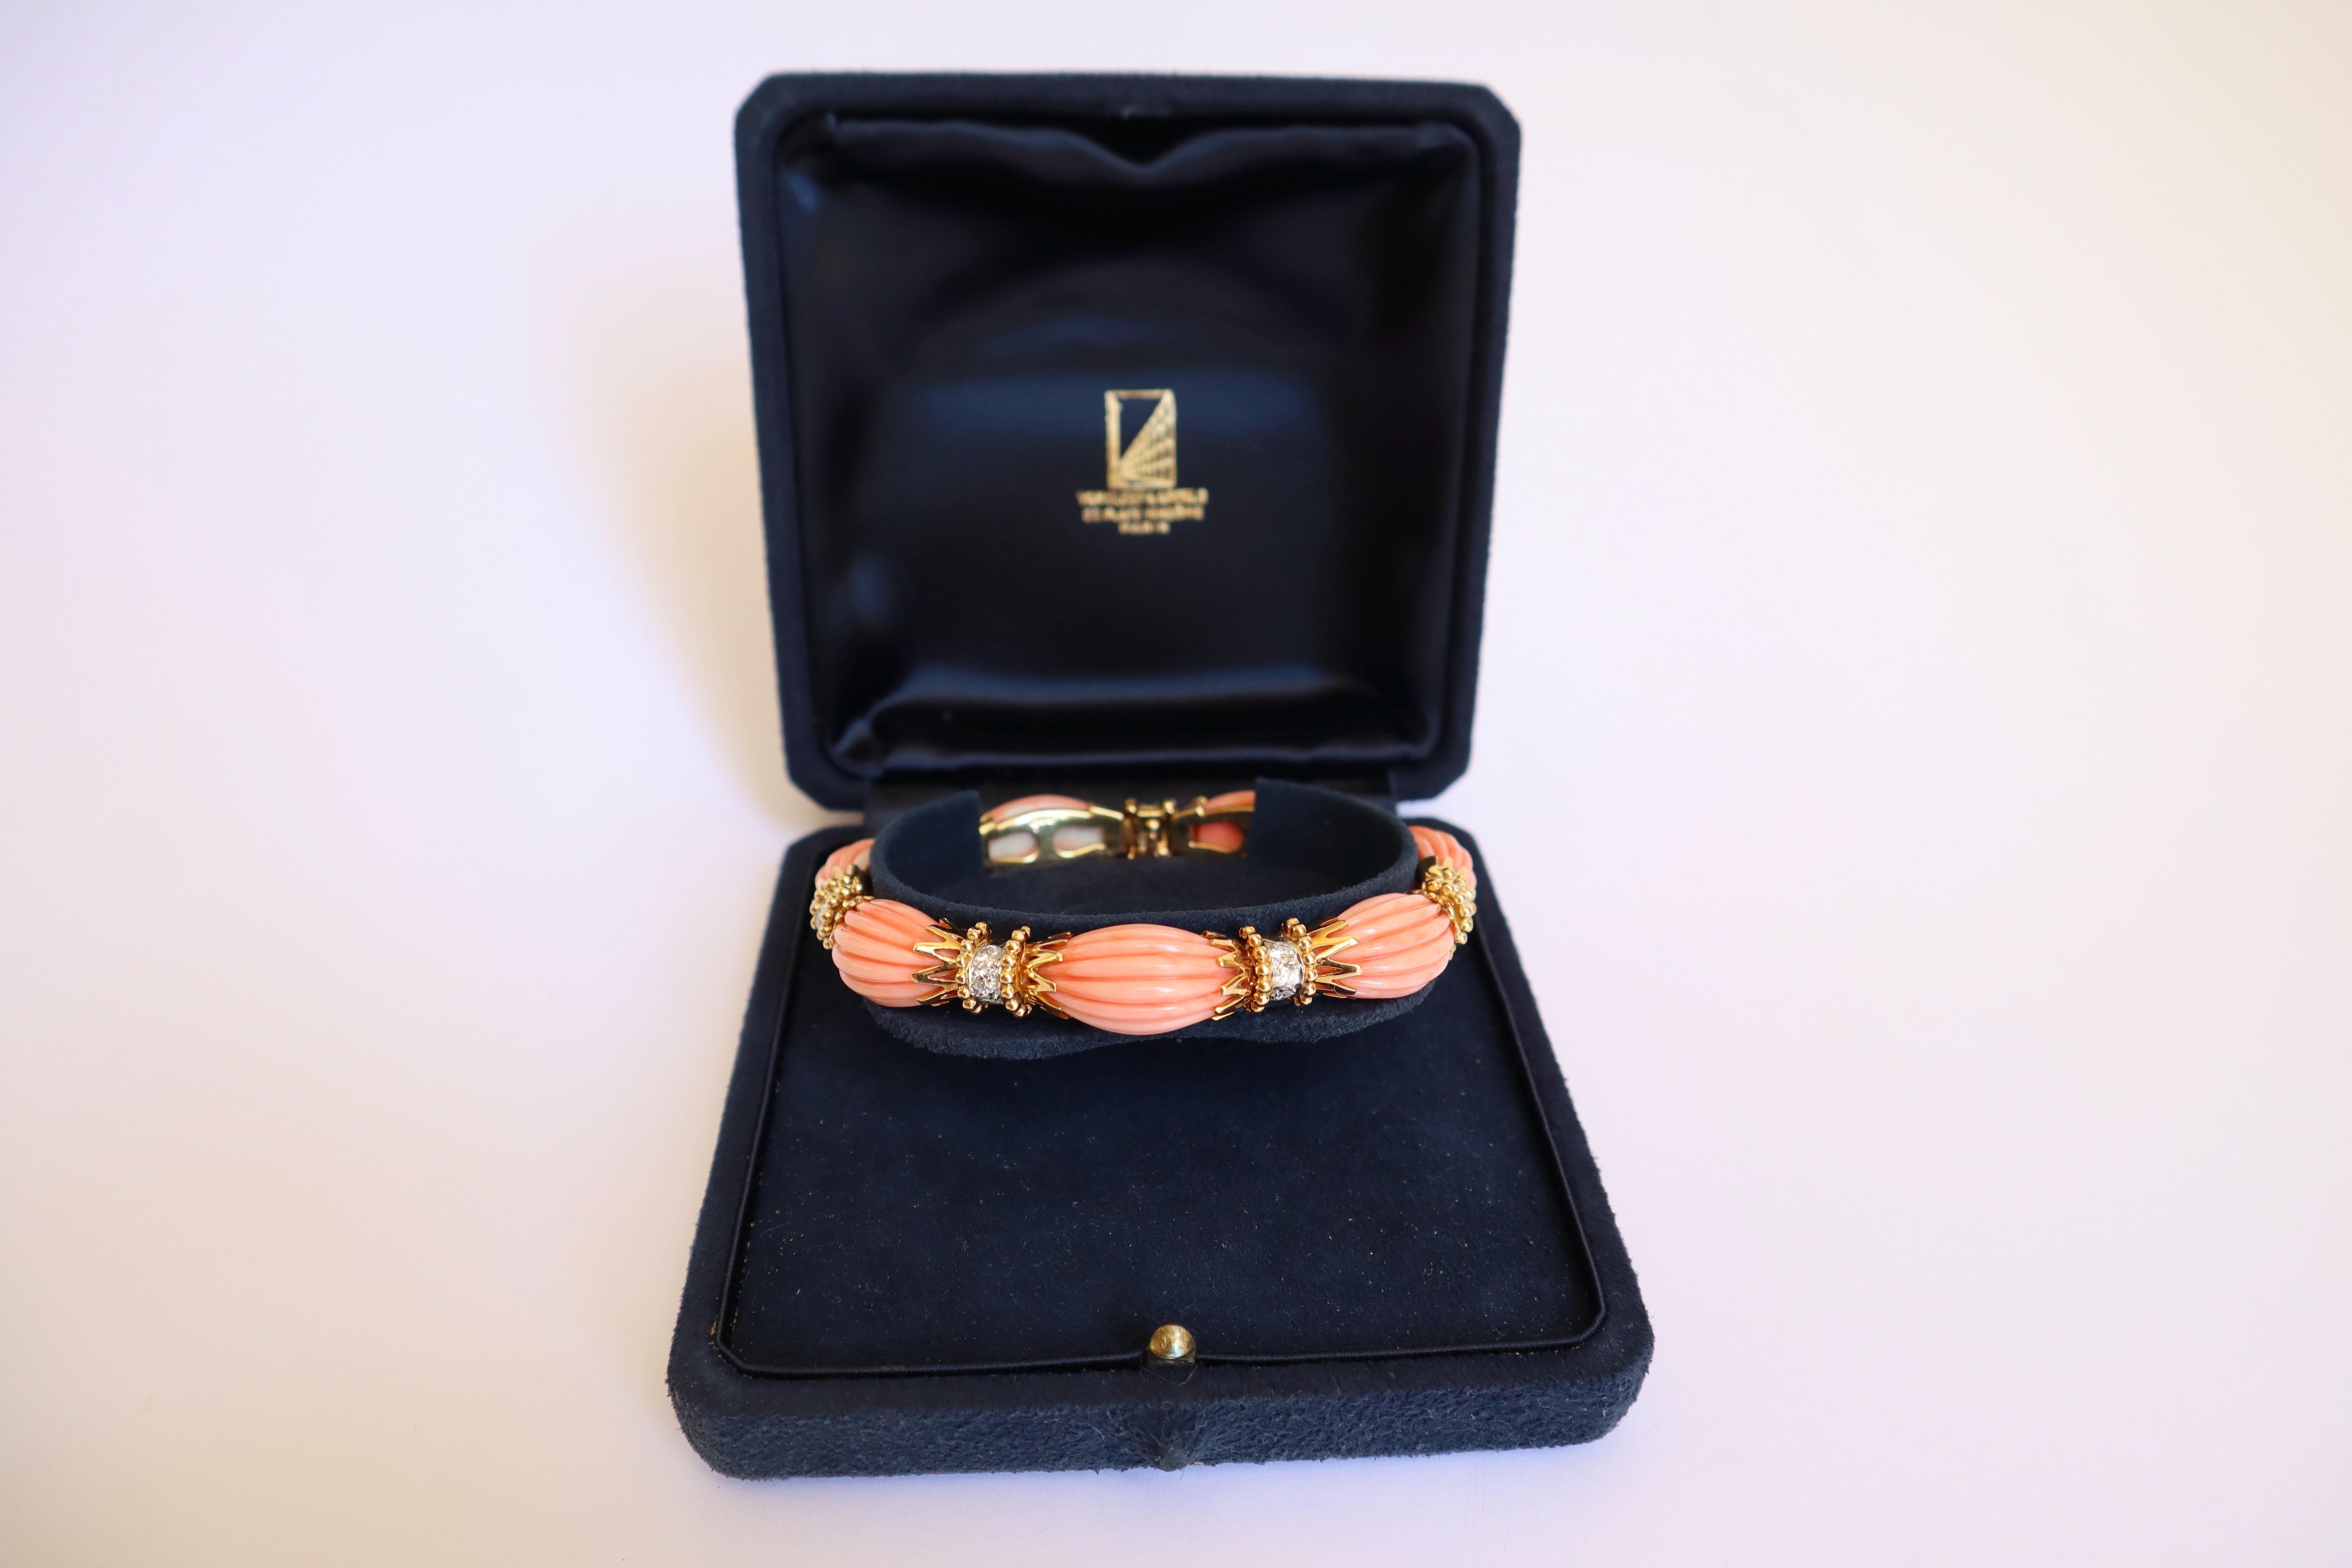 VAN CLEEF AND ARPELS Bracelet in 18 carat yellow gold (750mil.) and in platinum, with oval cabochons of gadrooned pink coral, held by 18 kt gold sleeves with pearl motifs, interspersed with platinum chevrons set with brilliant-cut diamonds.
7